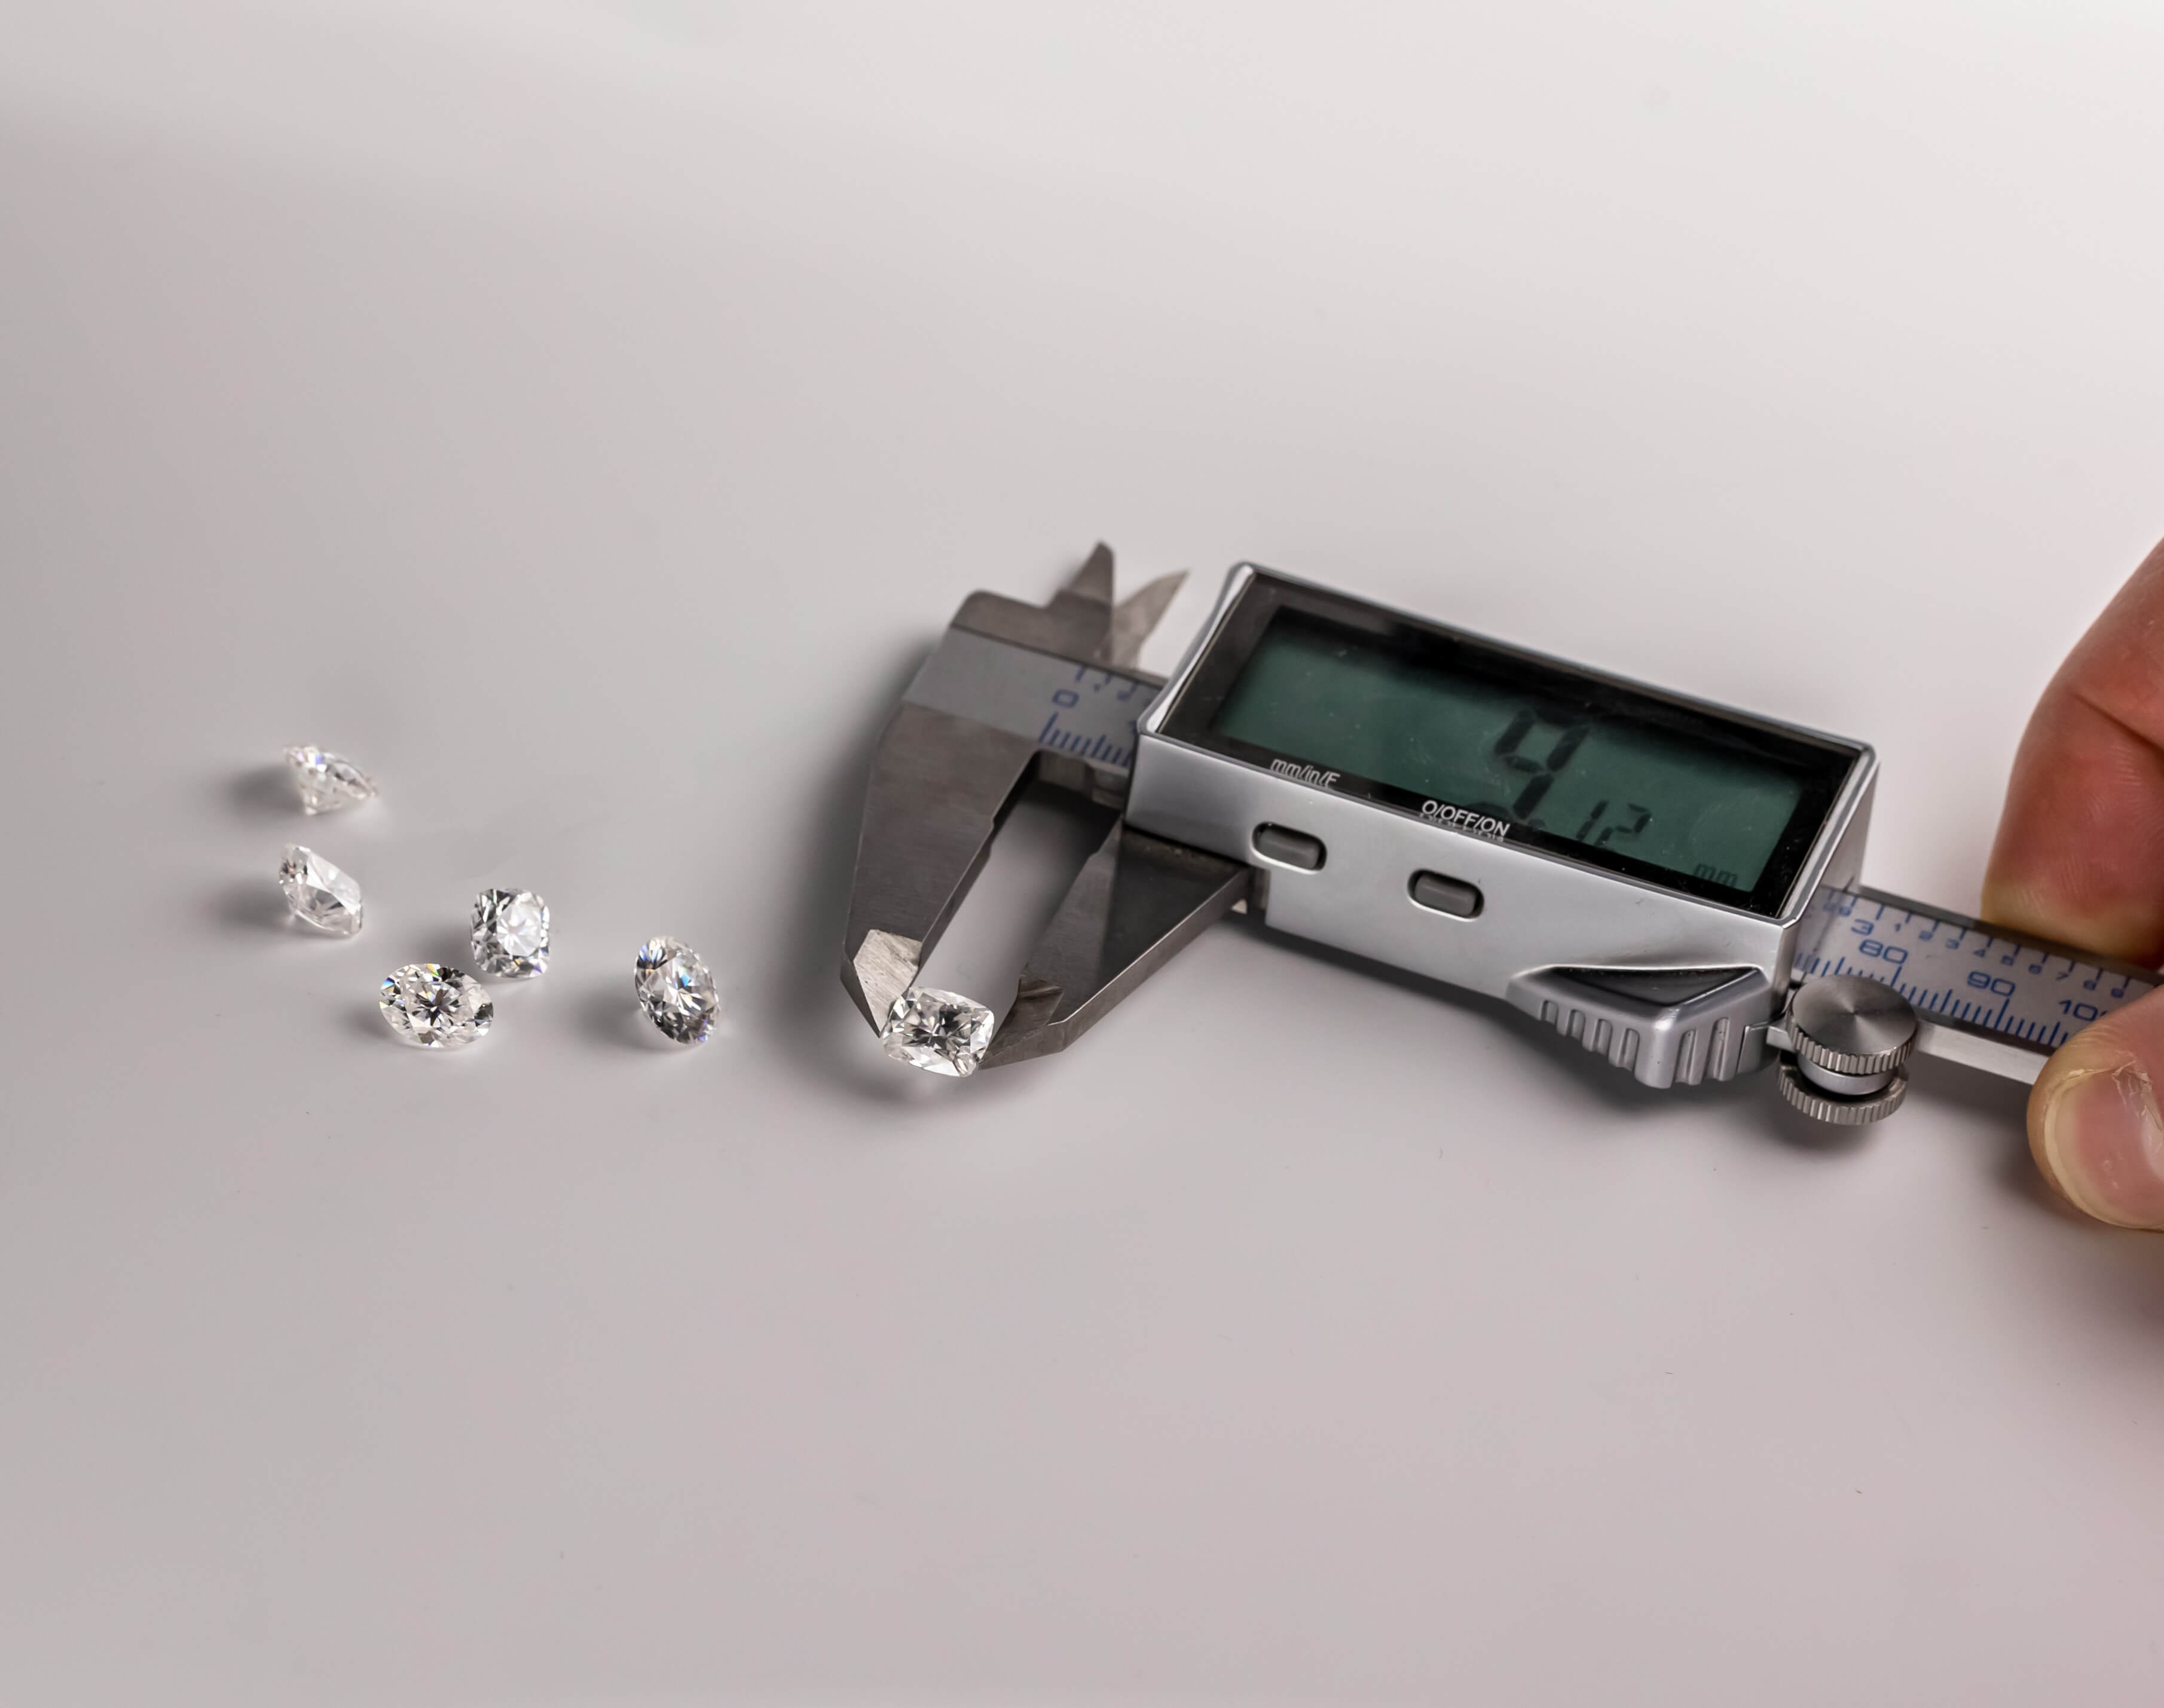 Measuring a diamond with calipers